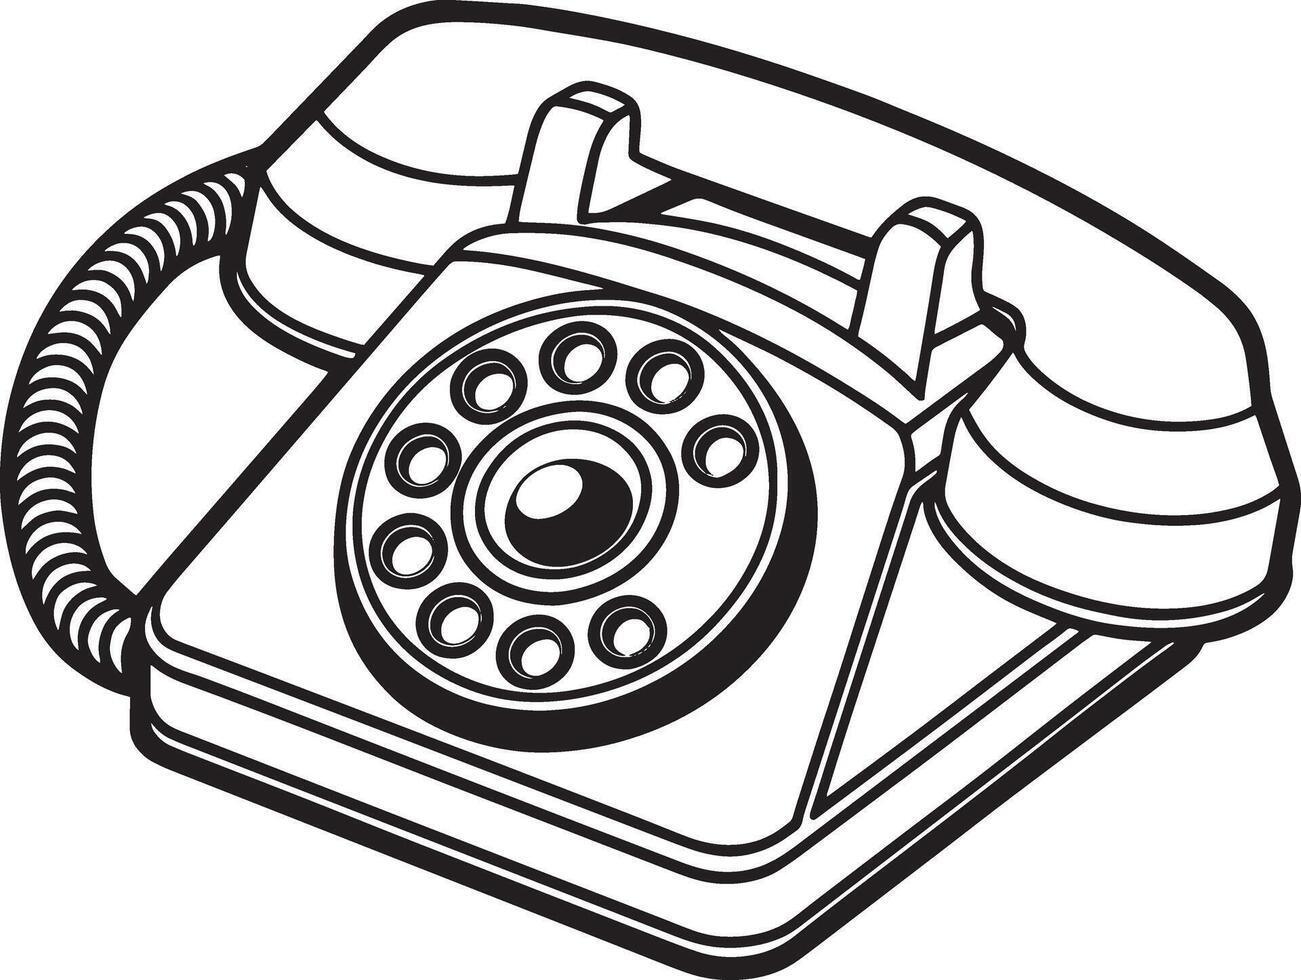 Illustration of an old telephone on a white background, illustration vector